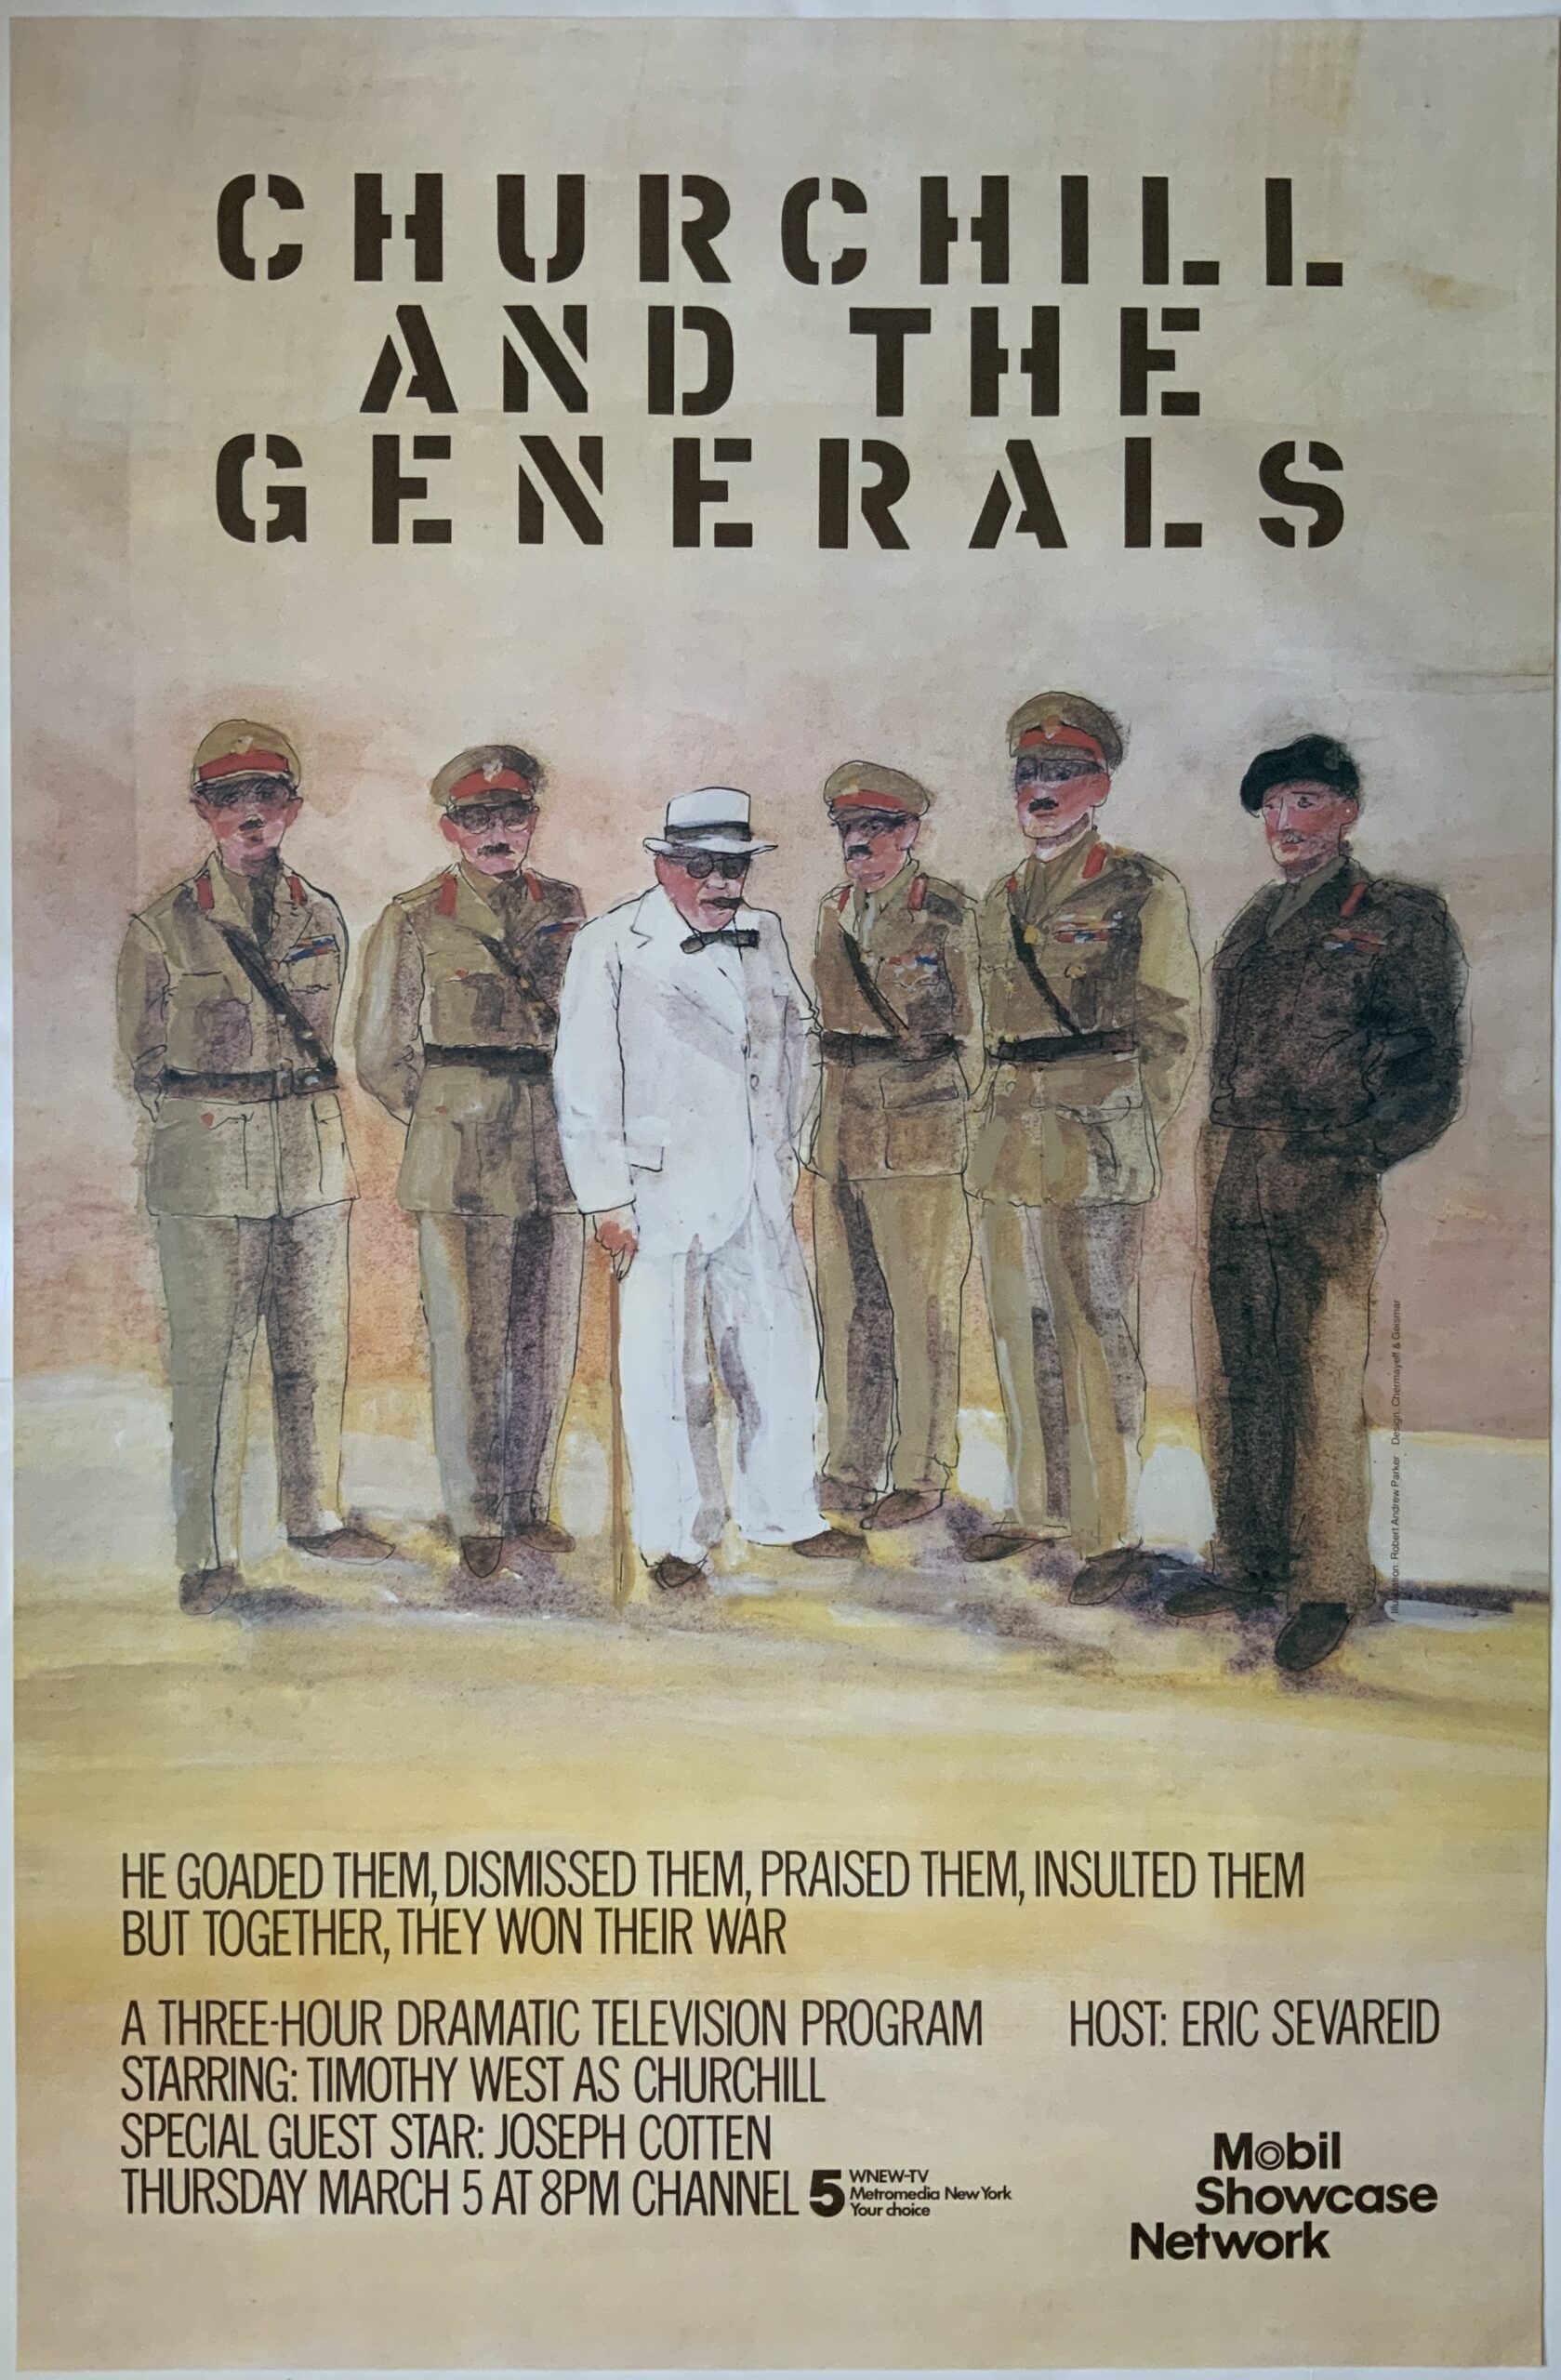 M636	CHURCHILL AND THE GENERALS MOBILE SHOWCASE NETWORK POSTER